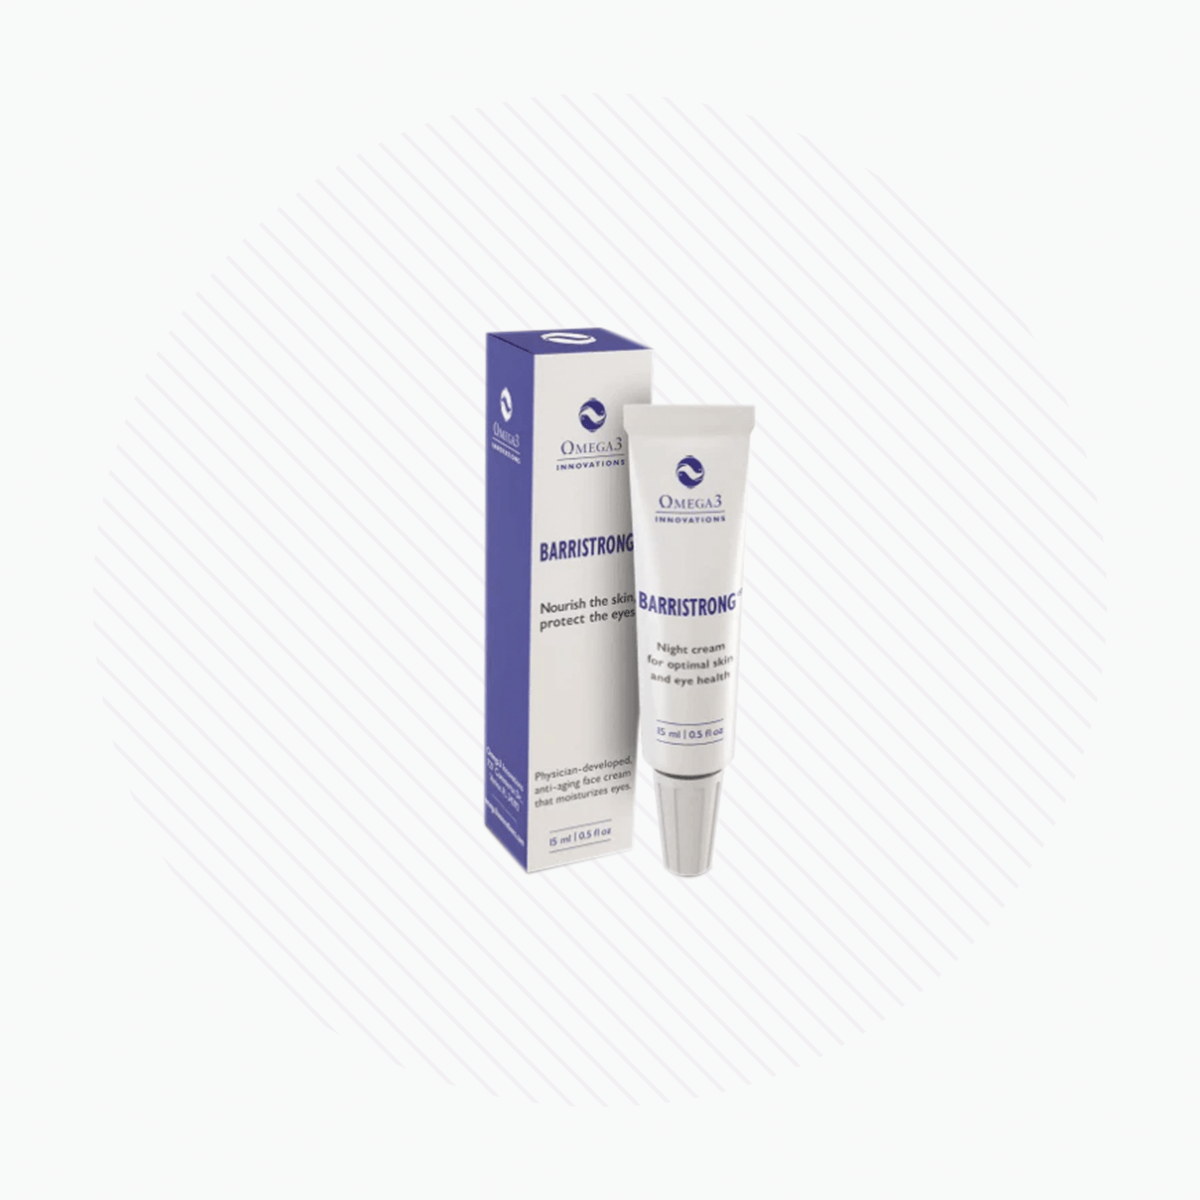 Barristrong Skin Cream for Dry Eyes and Irriated Eyelids (1 tube) Cold Shipped - Dryeye Rescue